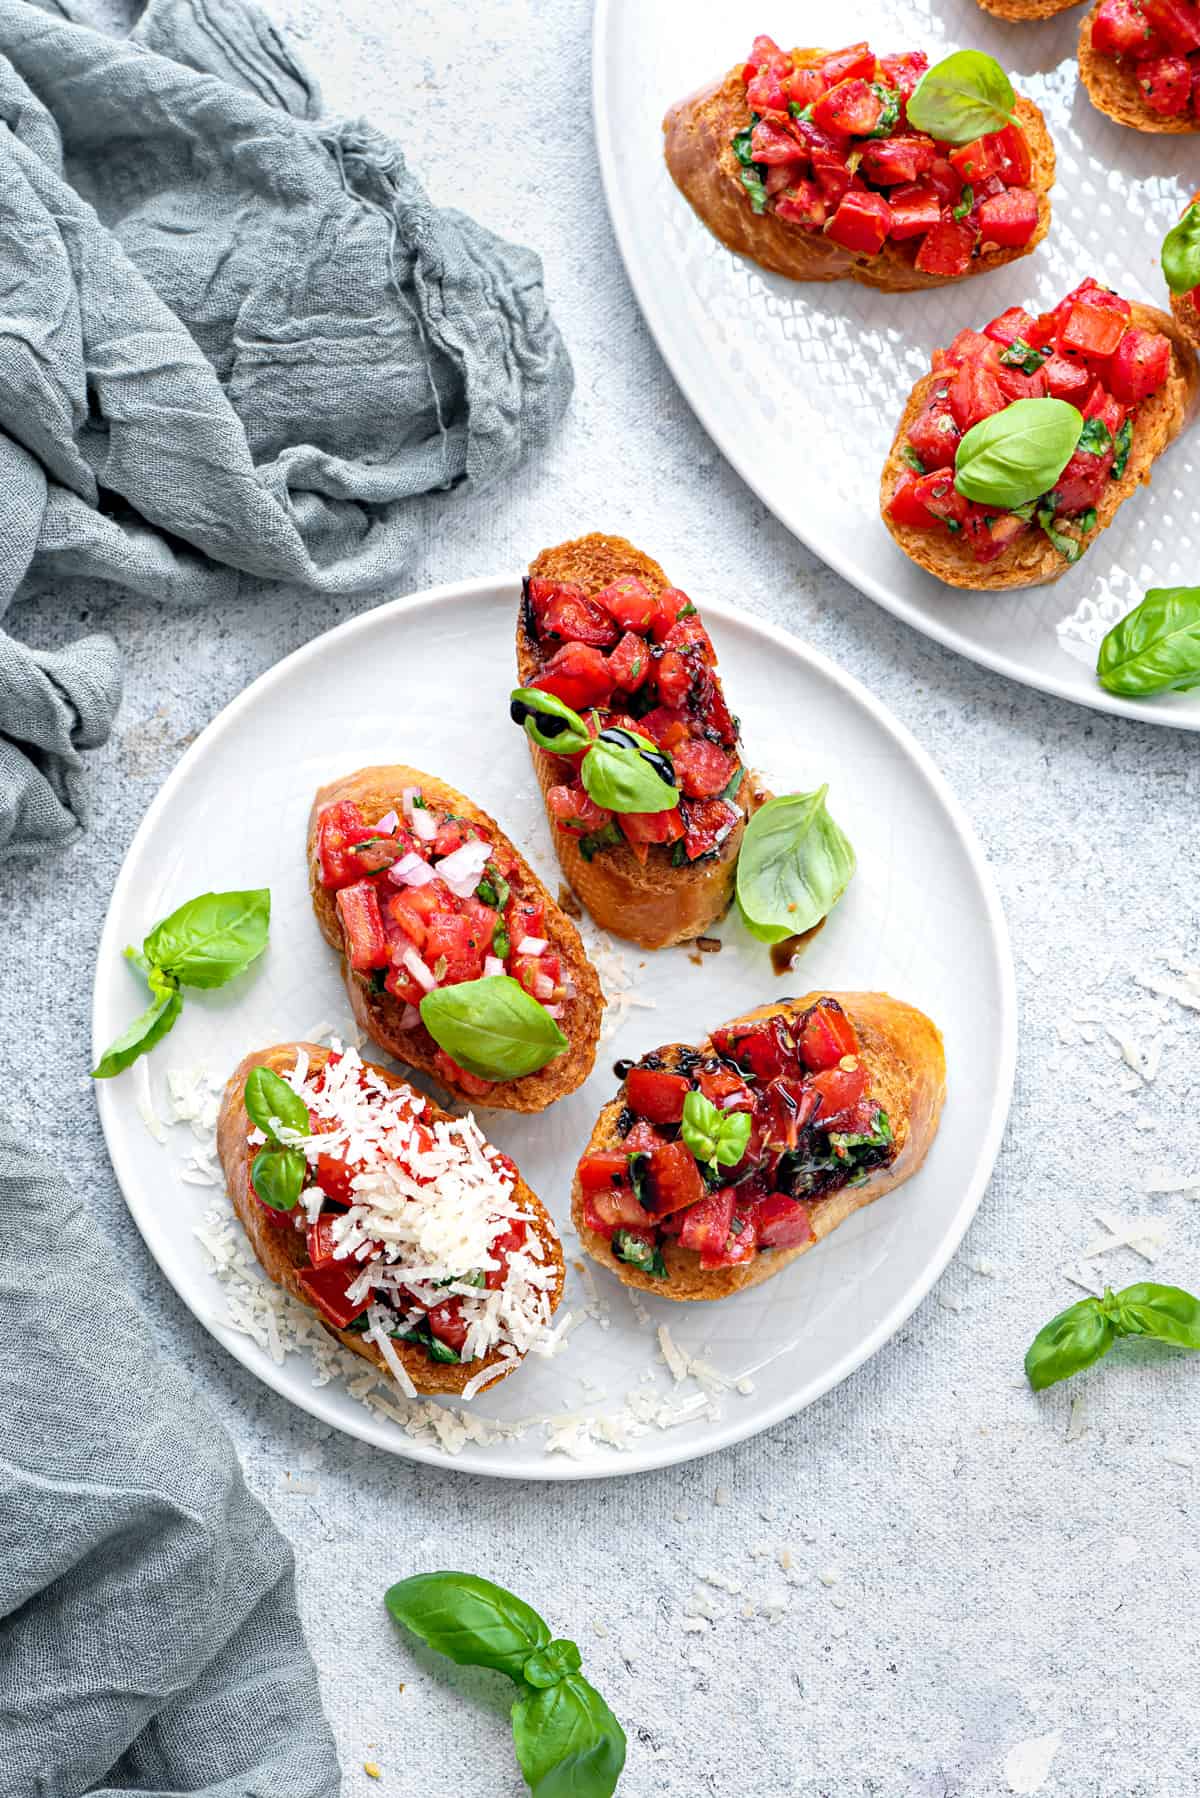 Top down view of a white plate with 4 servings of bruschetta. A few pieces of baby basil garnish the plate. One of the baguettes with tomatoes is topped with shredded parmesan cheese.